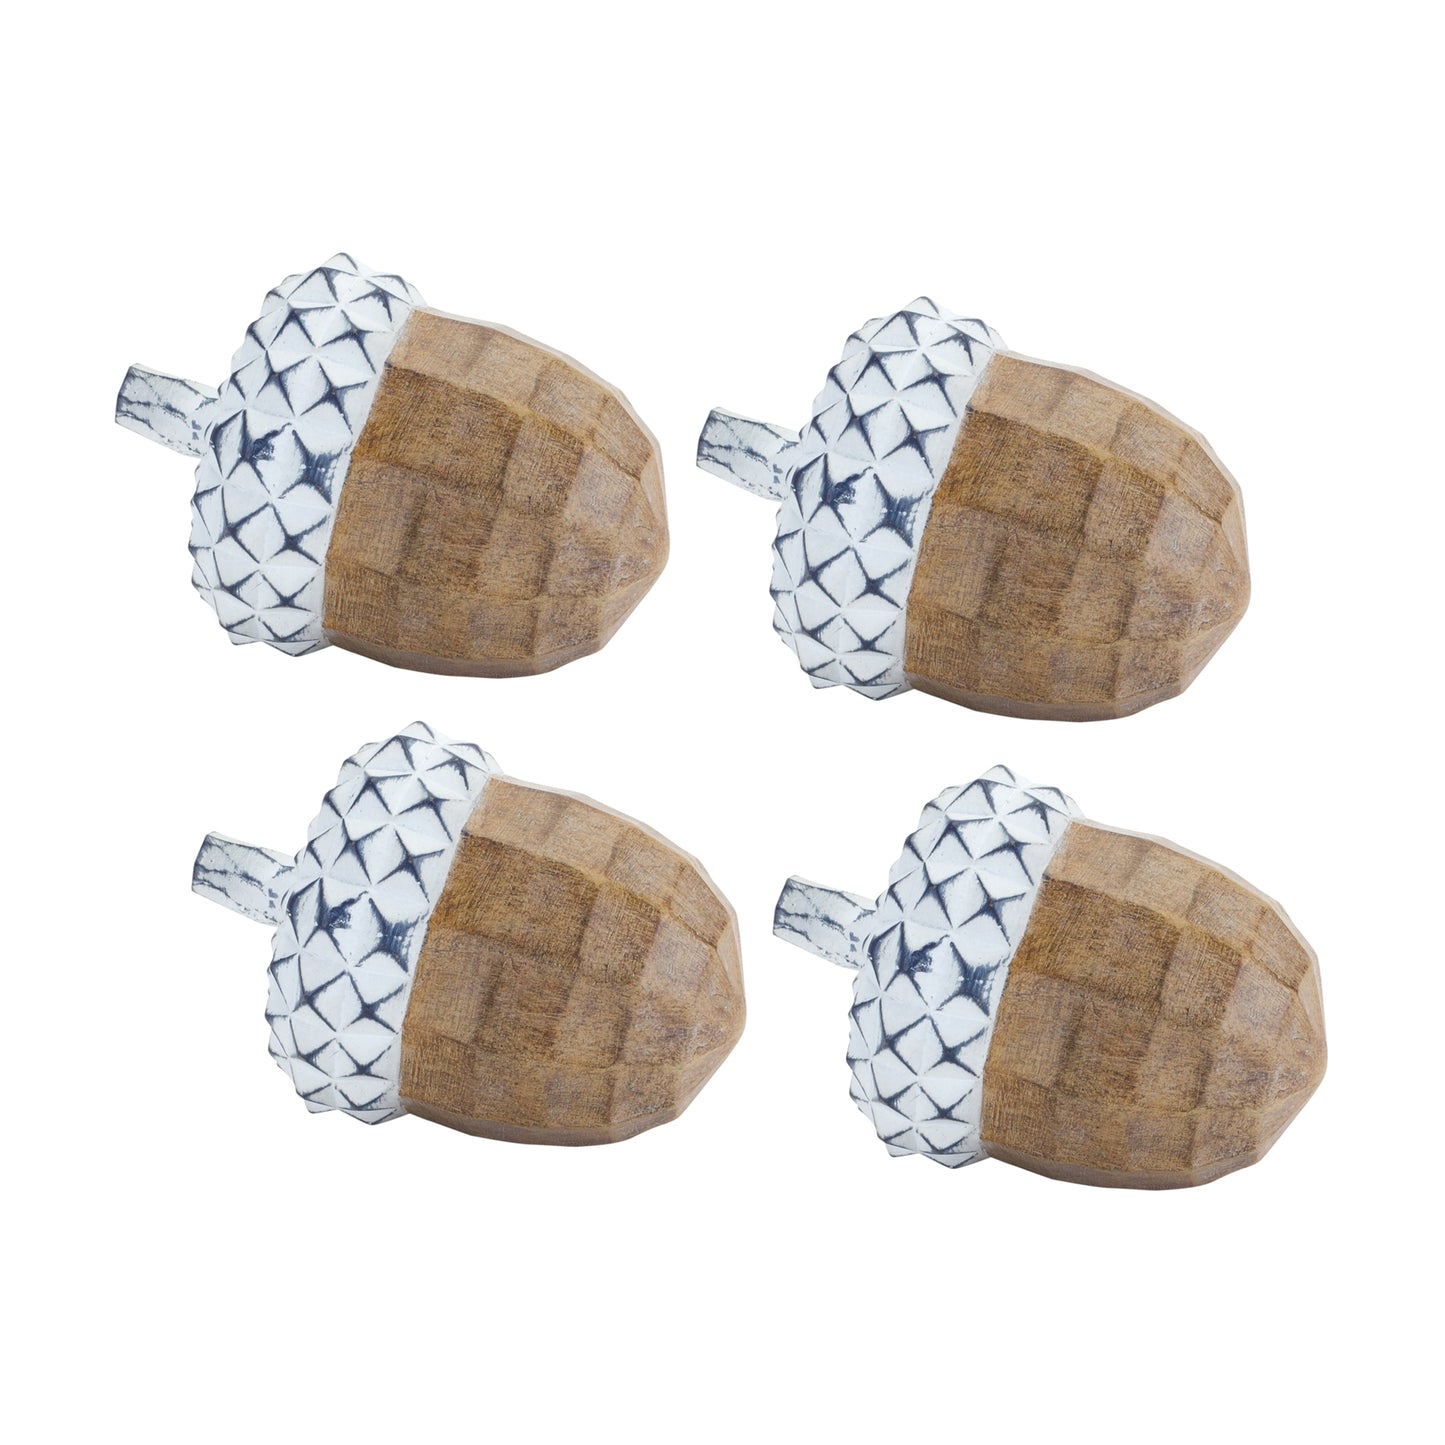 White Washed Acorn Décor with Wood Grain Design (Set of 4)